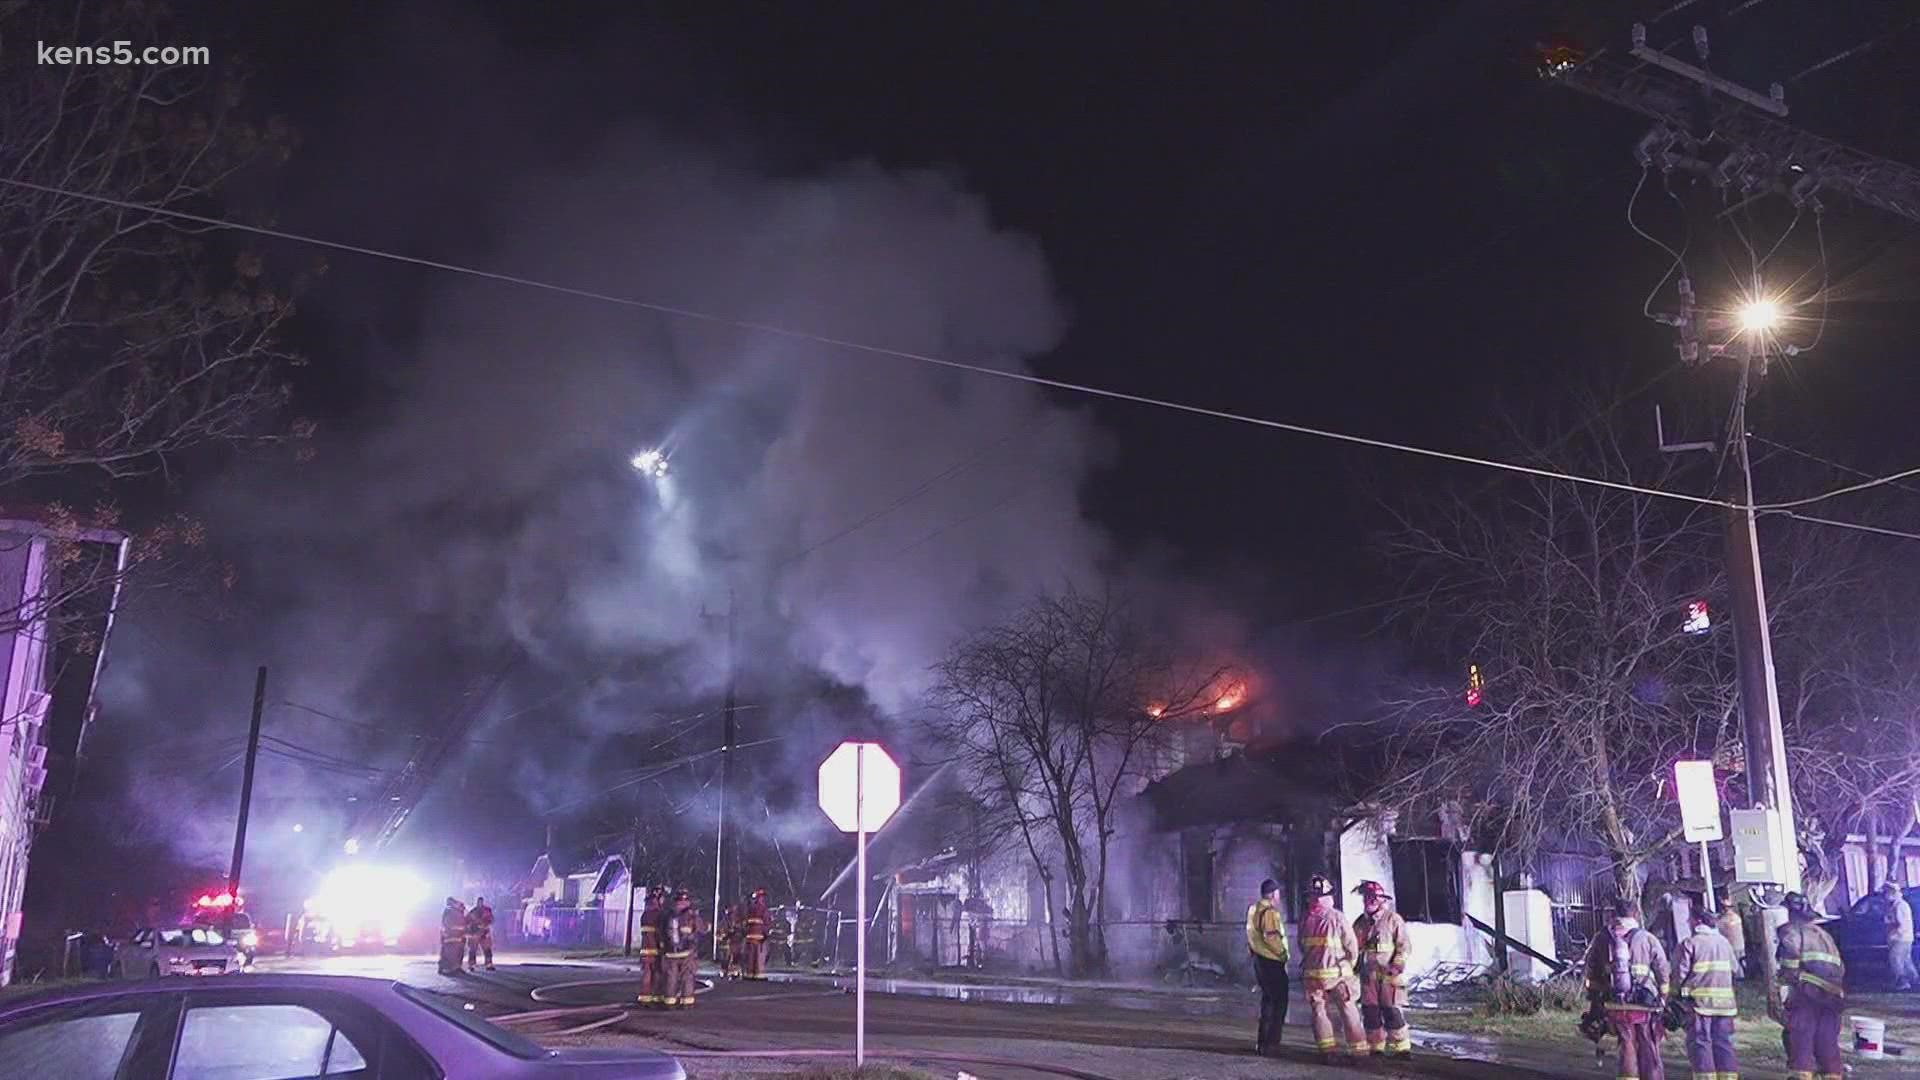 The fire started just before 2 a.m. on Hammond Avenue across from Highland Park Elementary School. When firefighters were working the fire, a gas line broke.